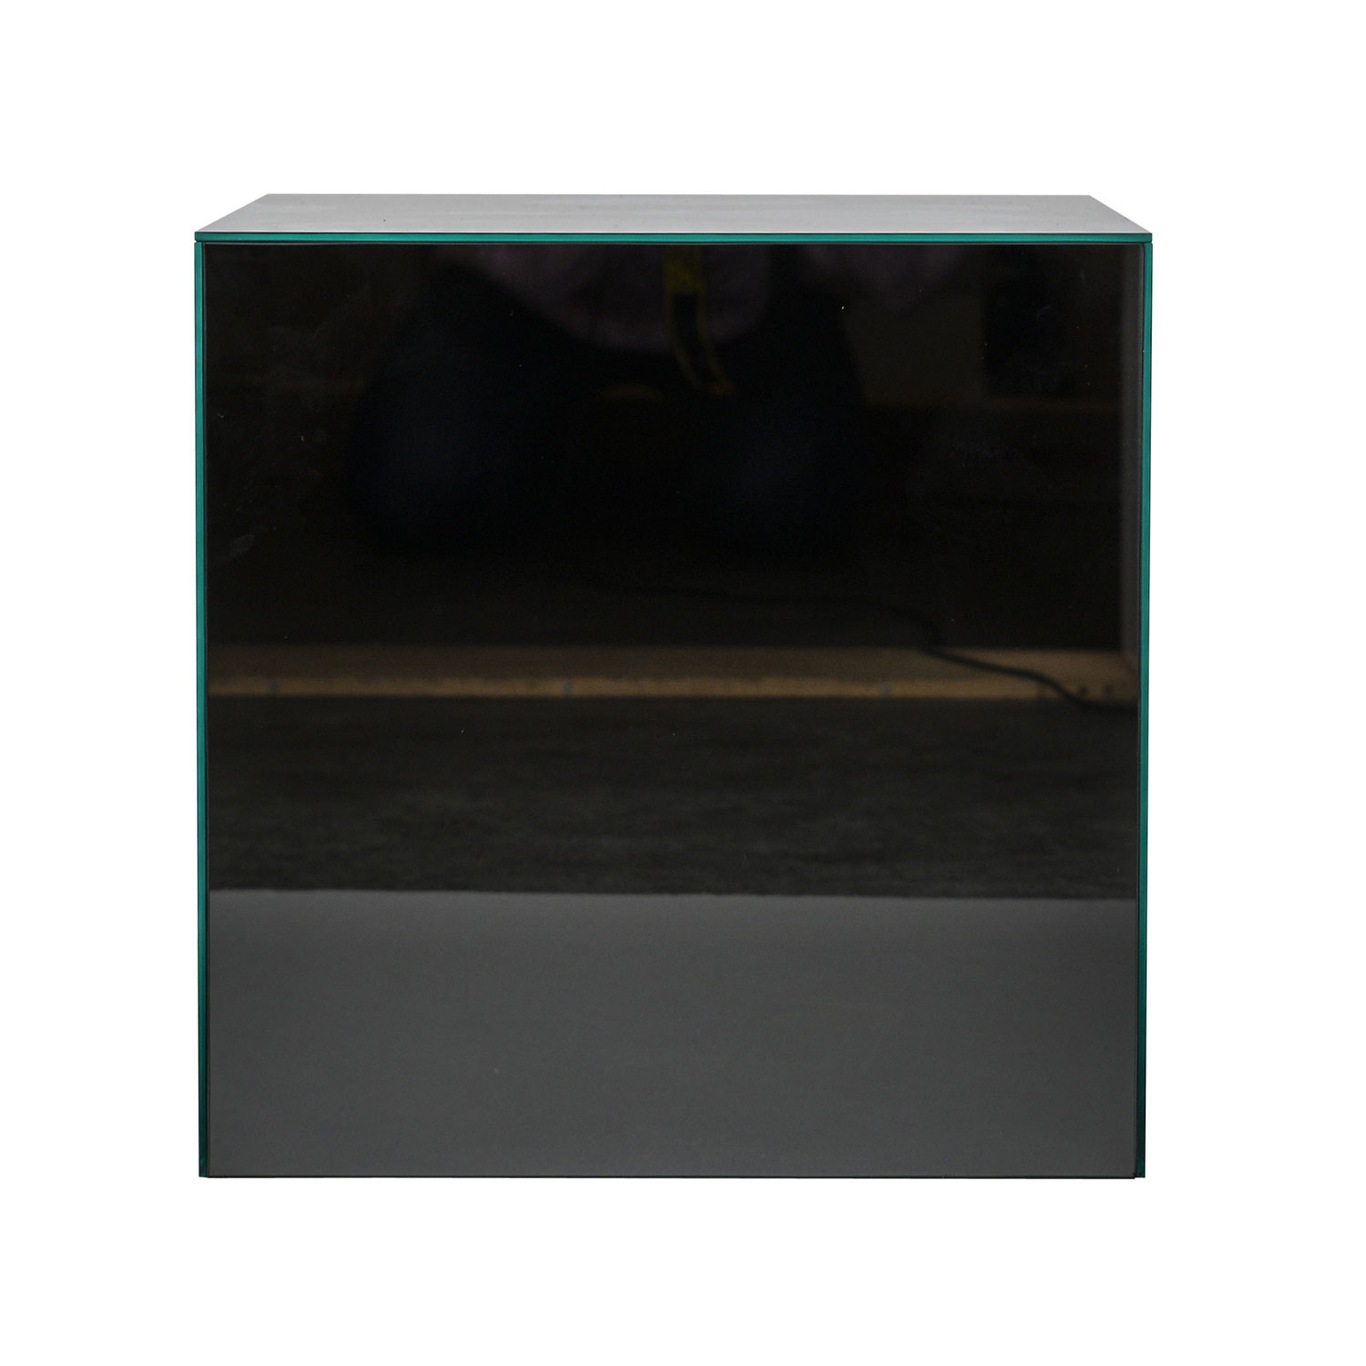 Cube Mirror Table 40x40 Cm Byon, Mirror Glass Cube Table